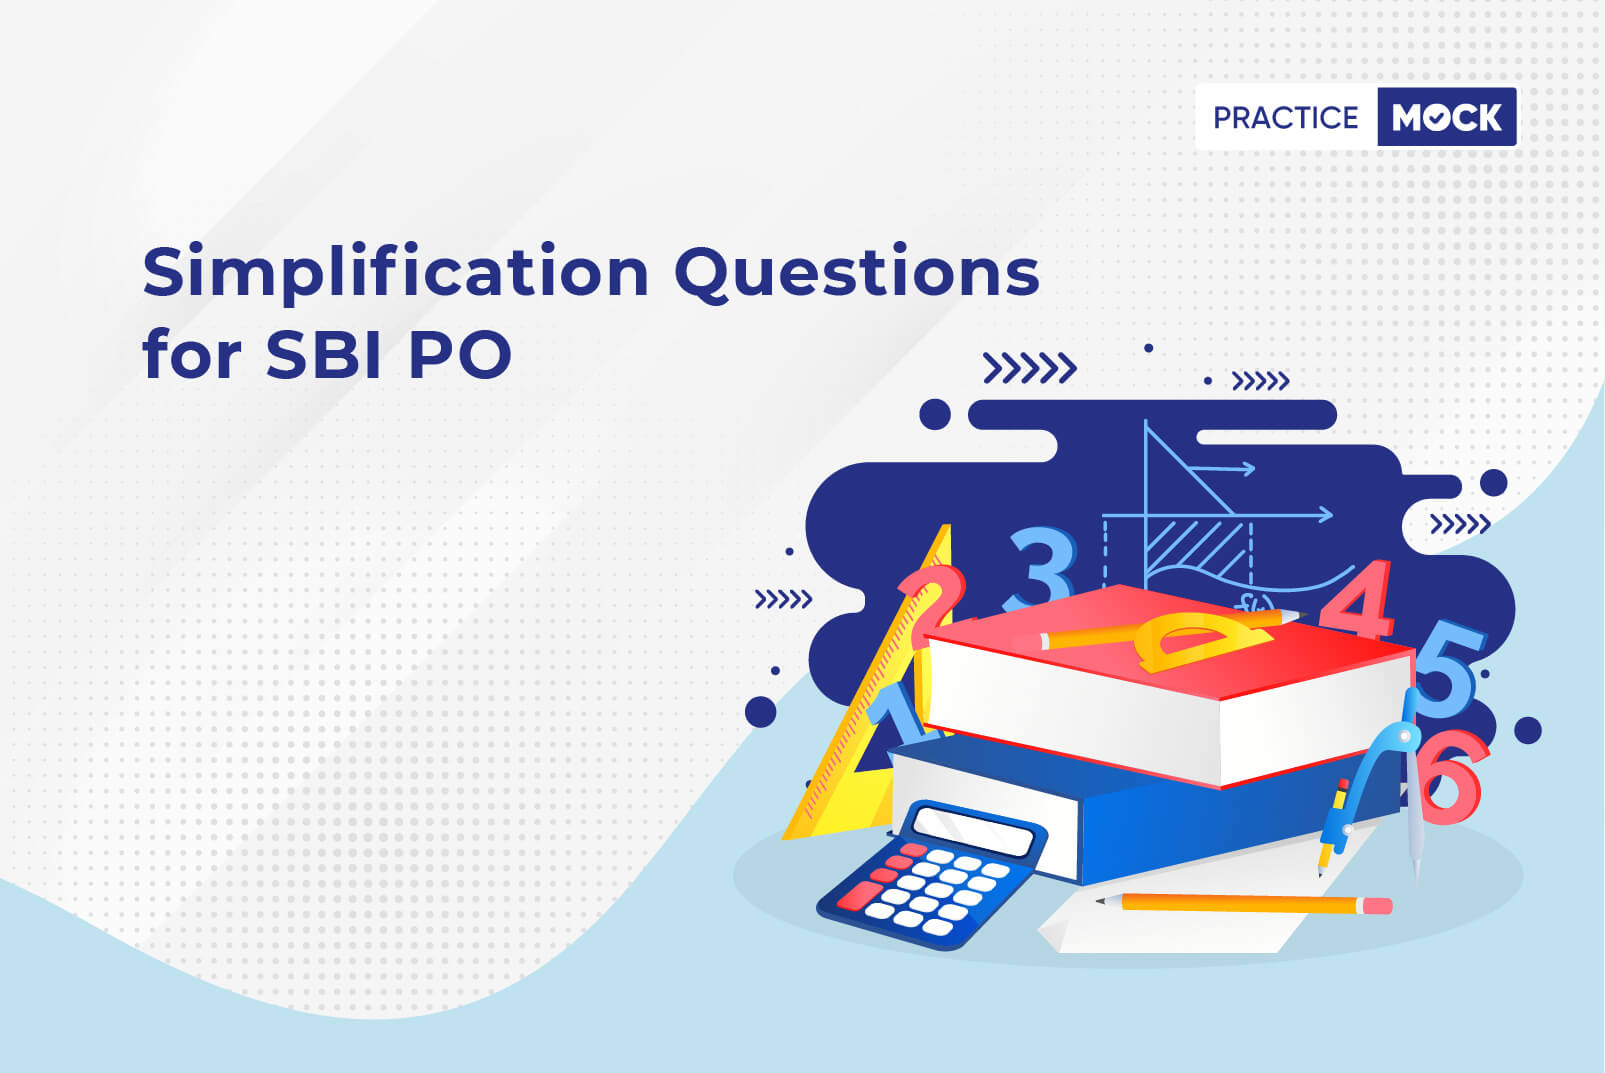 Simplification Questions for SBI PO